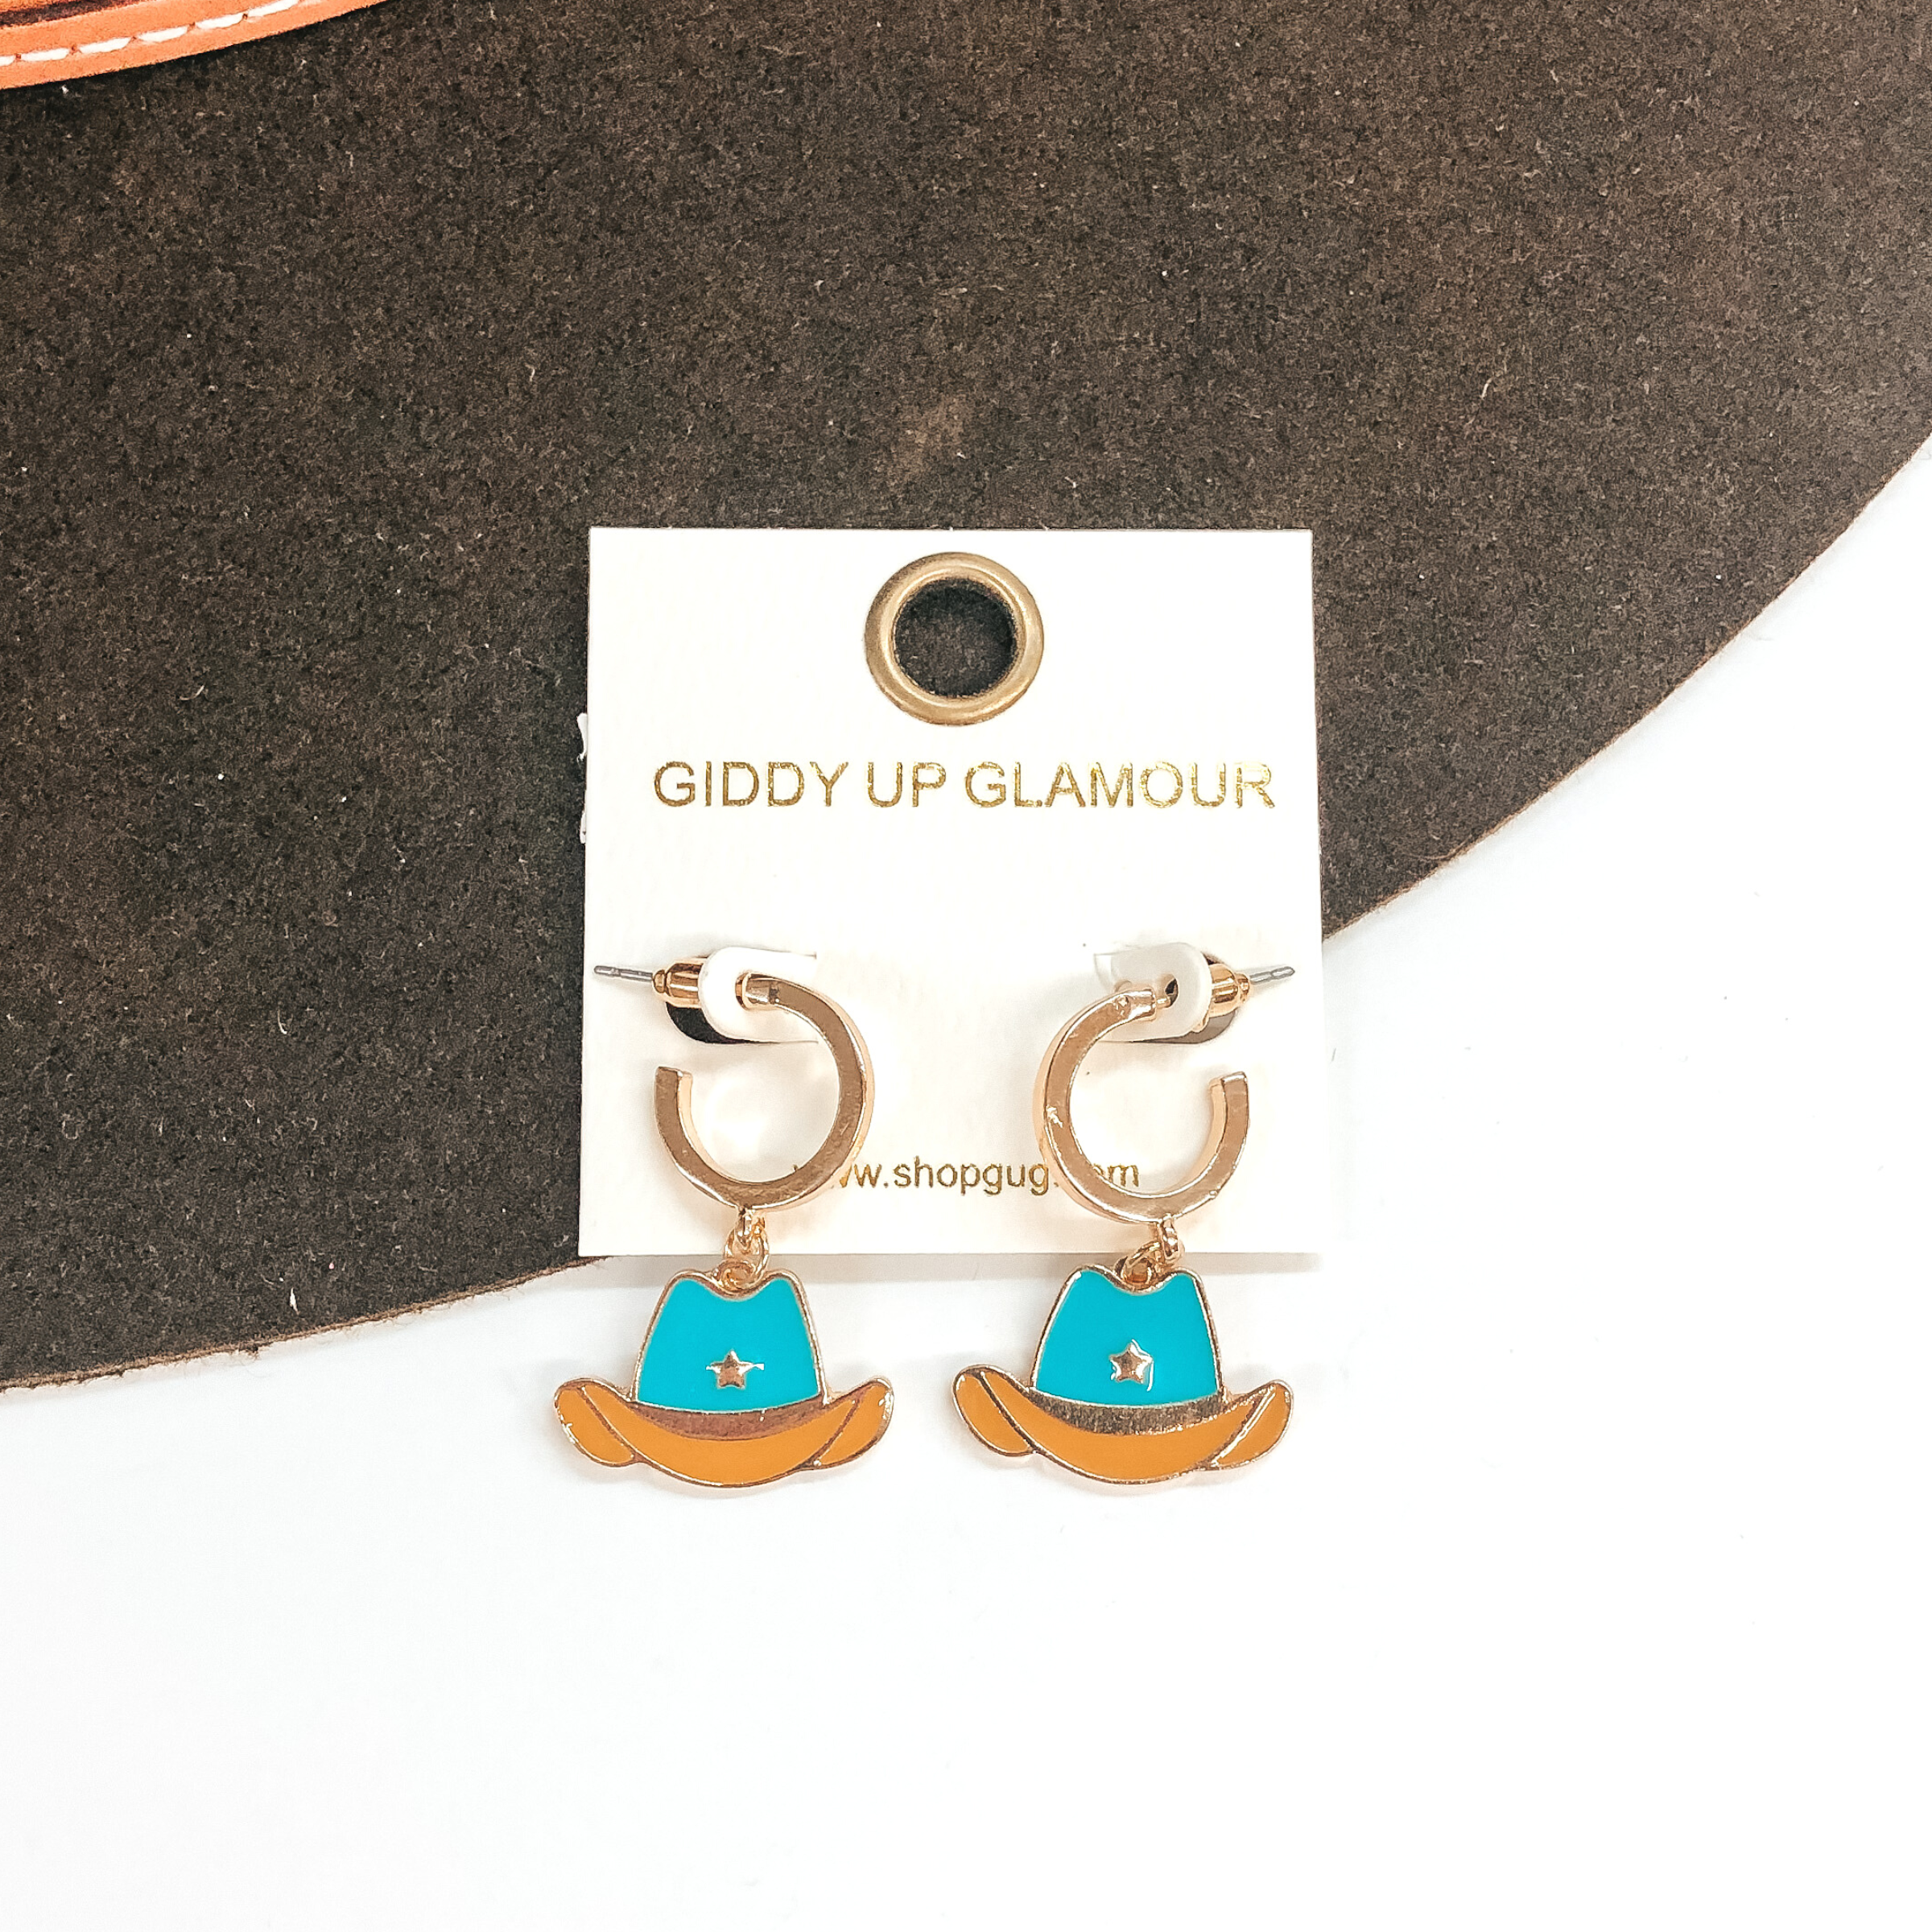 Small gold hoop earrings with a turquoise and tan hat pendant hanging from the bottom. These earrings are pictured on a white and brown background. 